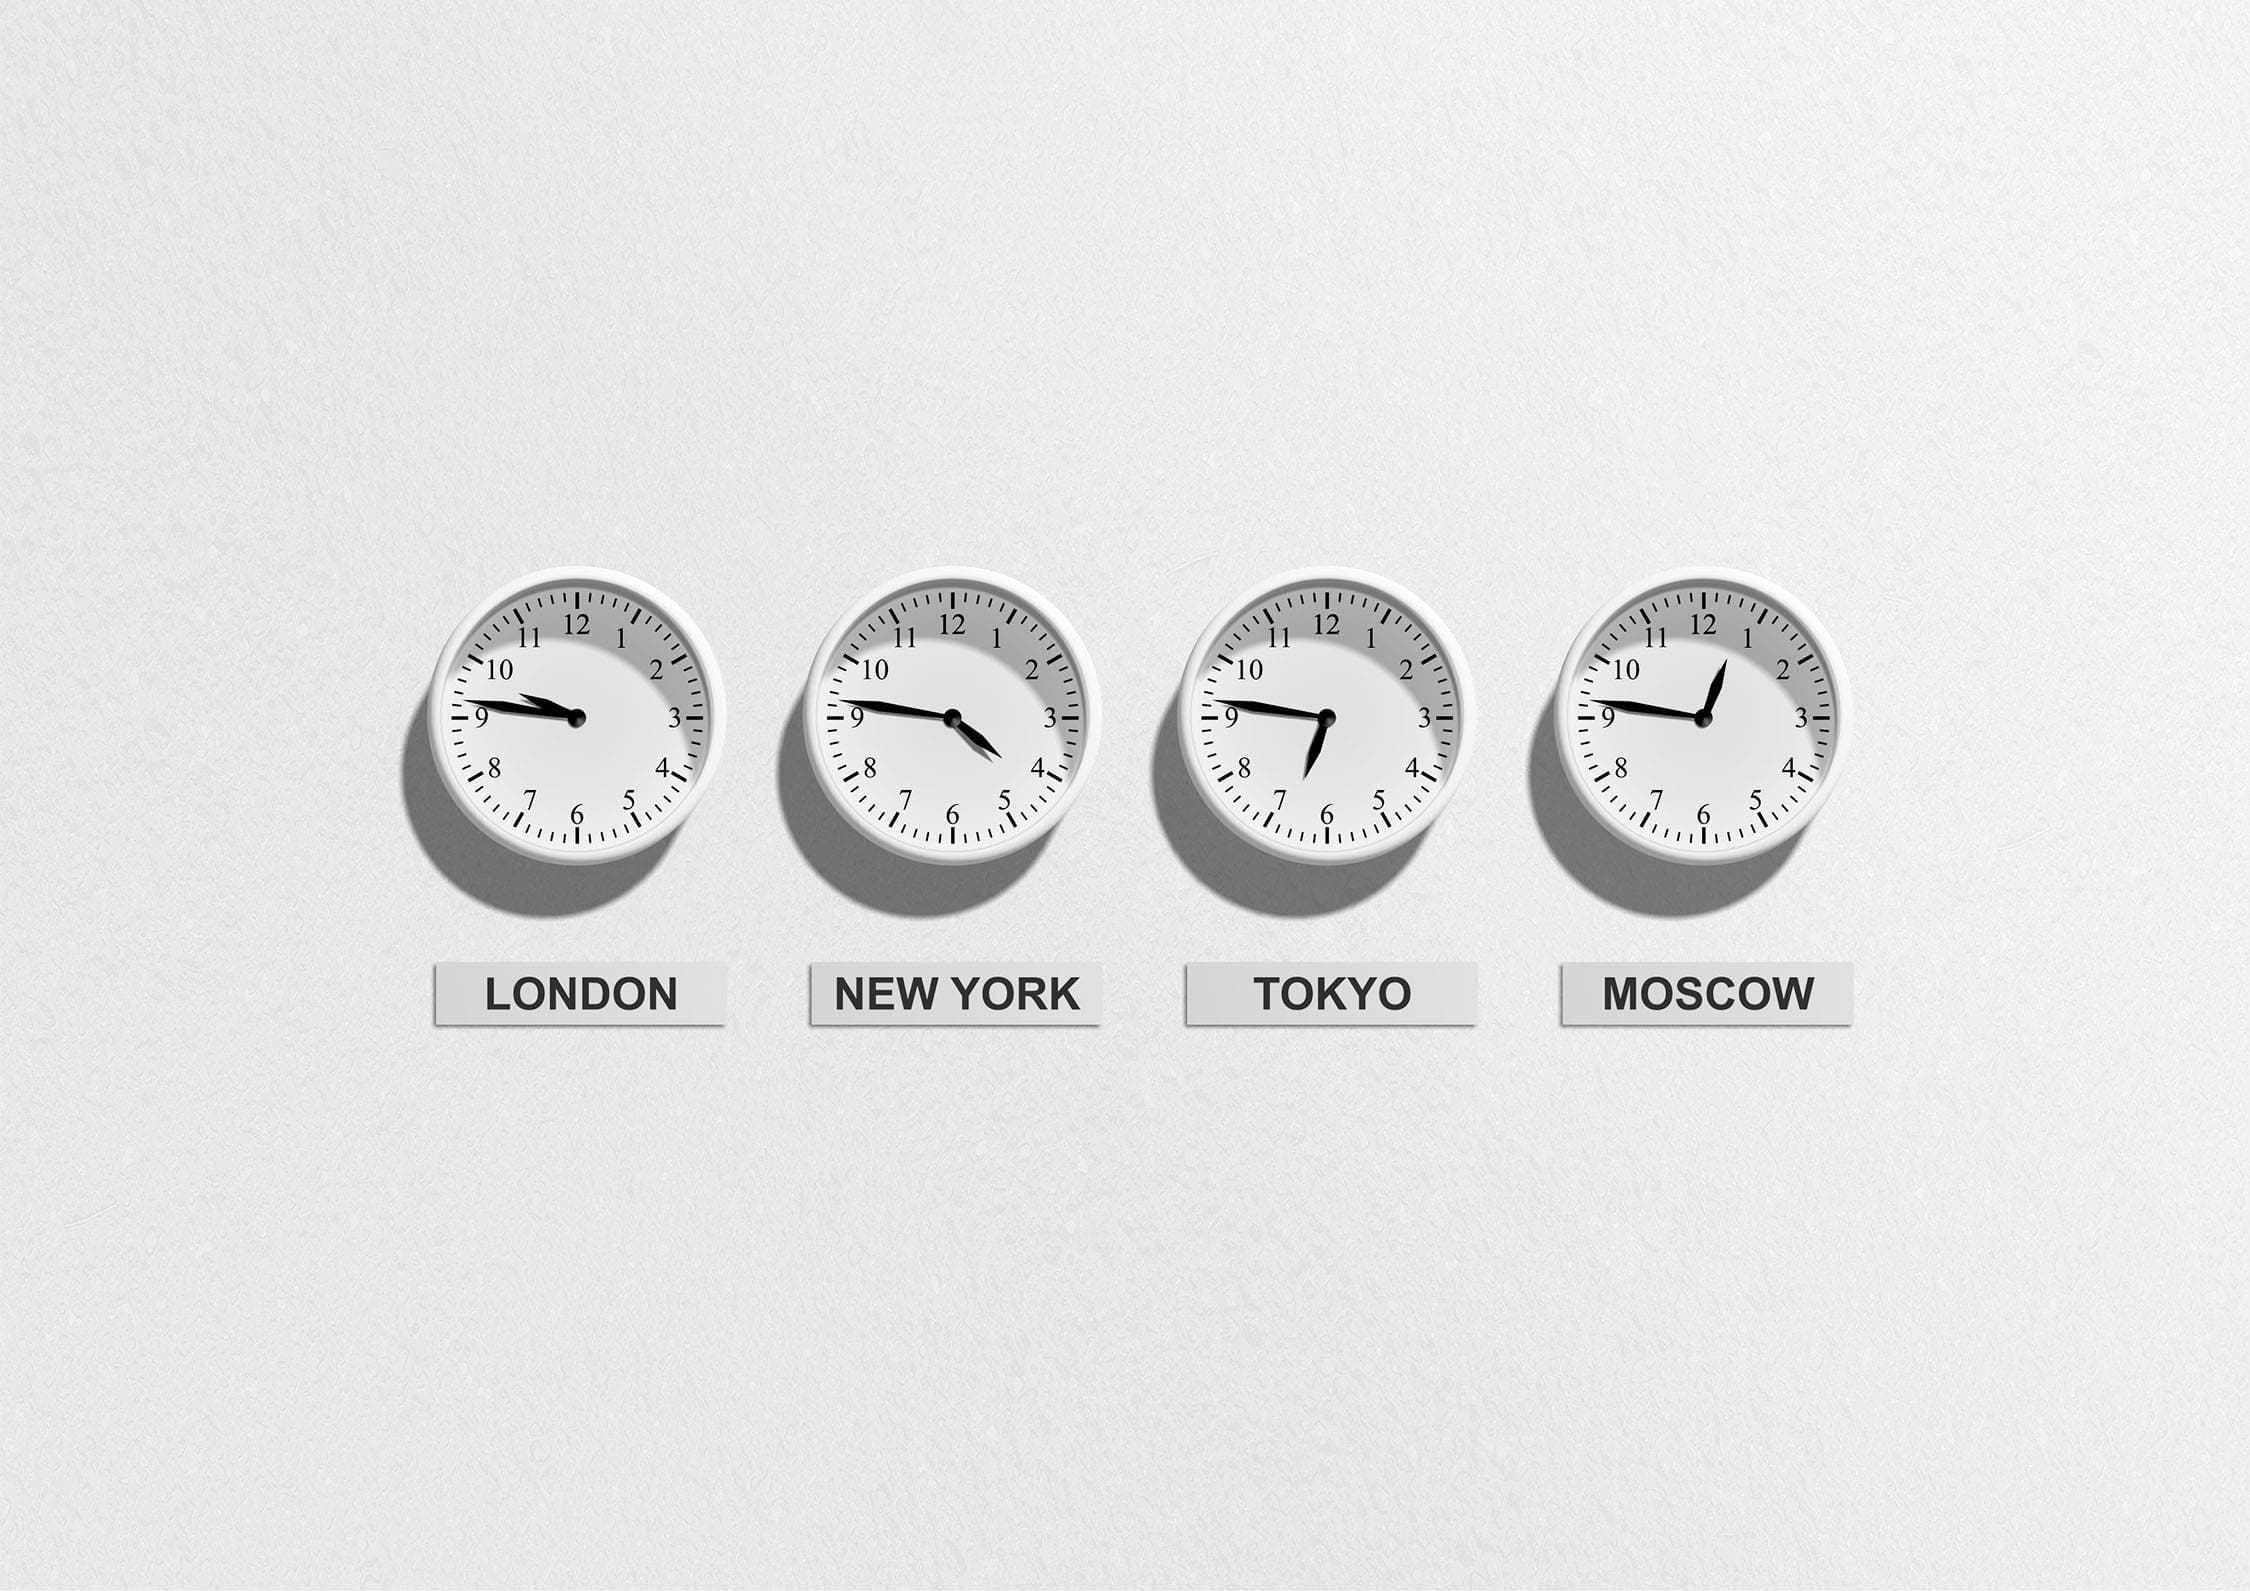 4 clocks showing time in various timezones